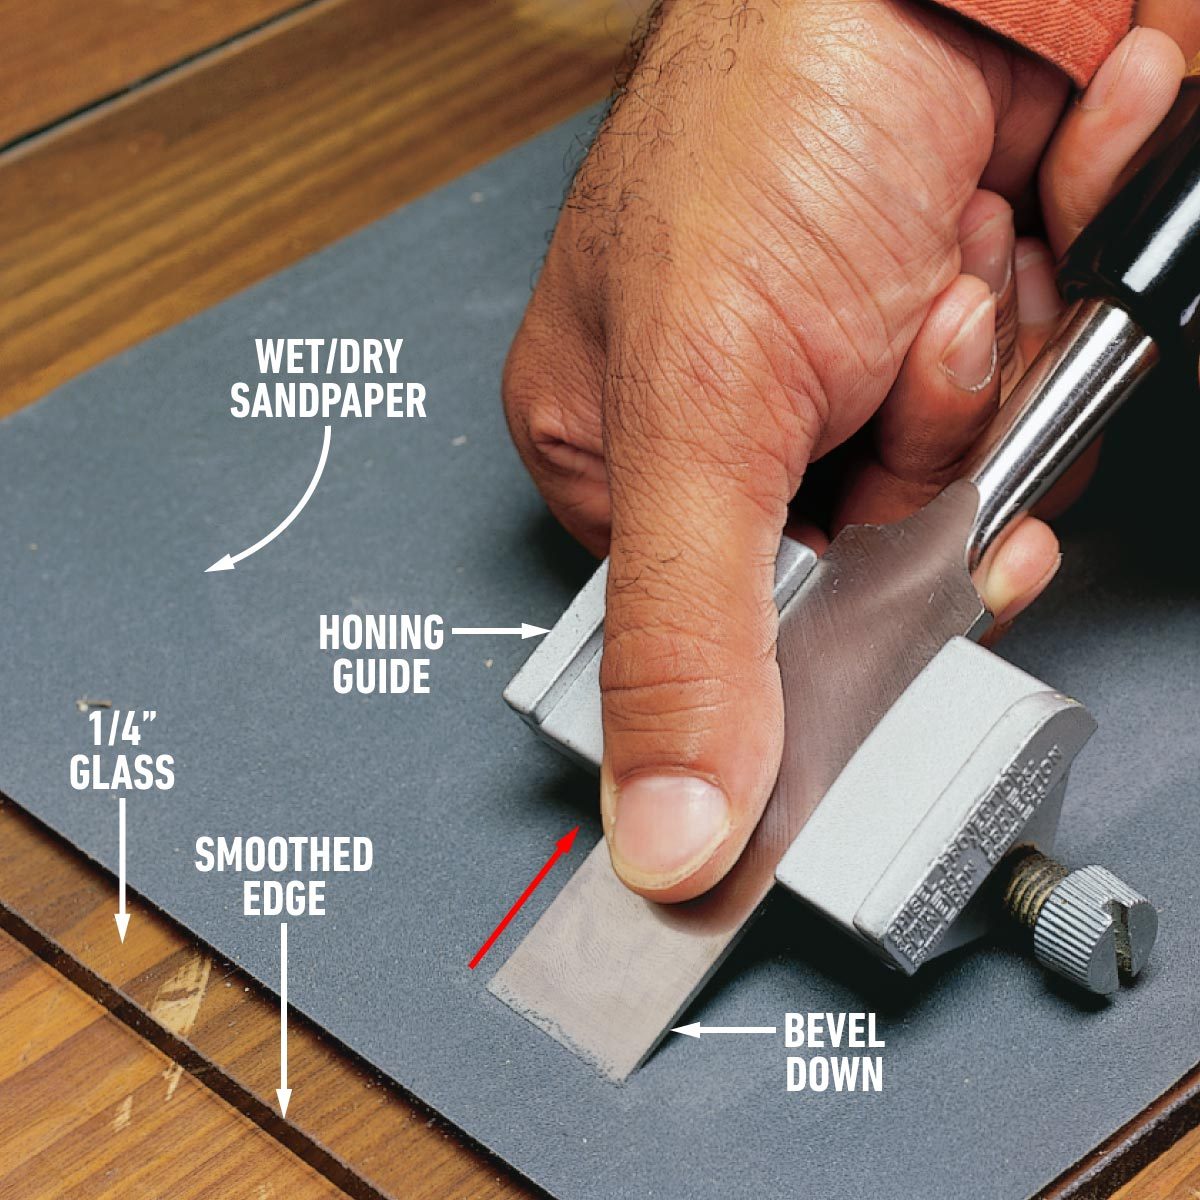 How To Use A Wood Chisel Woodworking Chisel Set Sharpening Basics